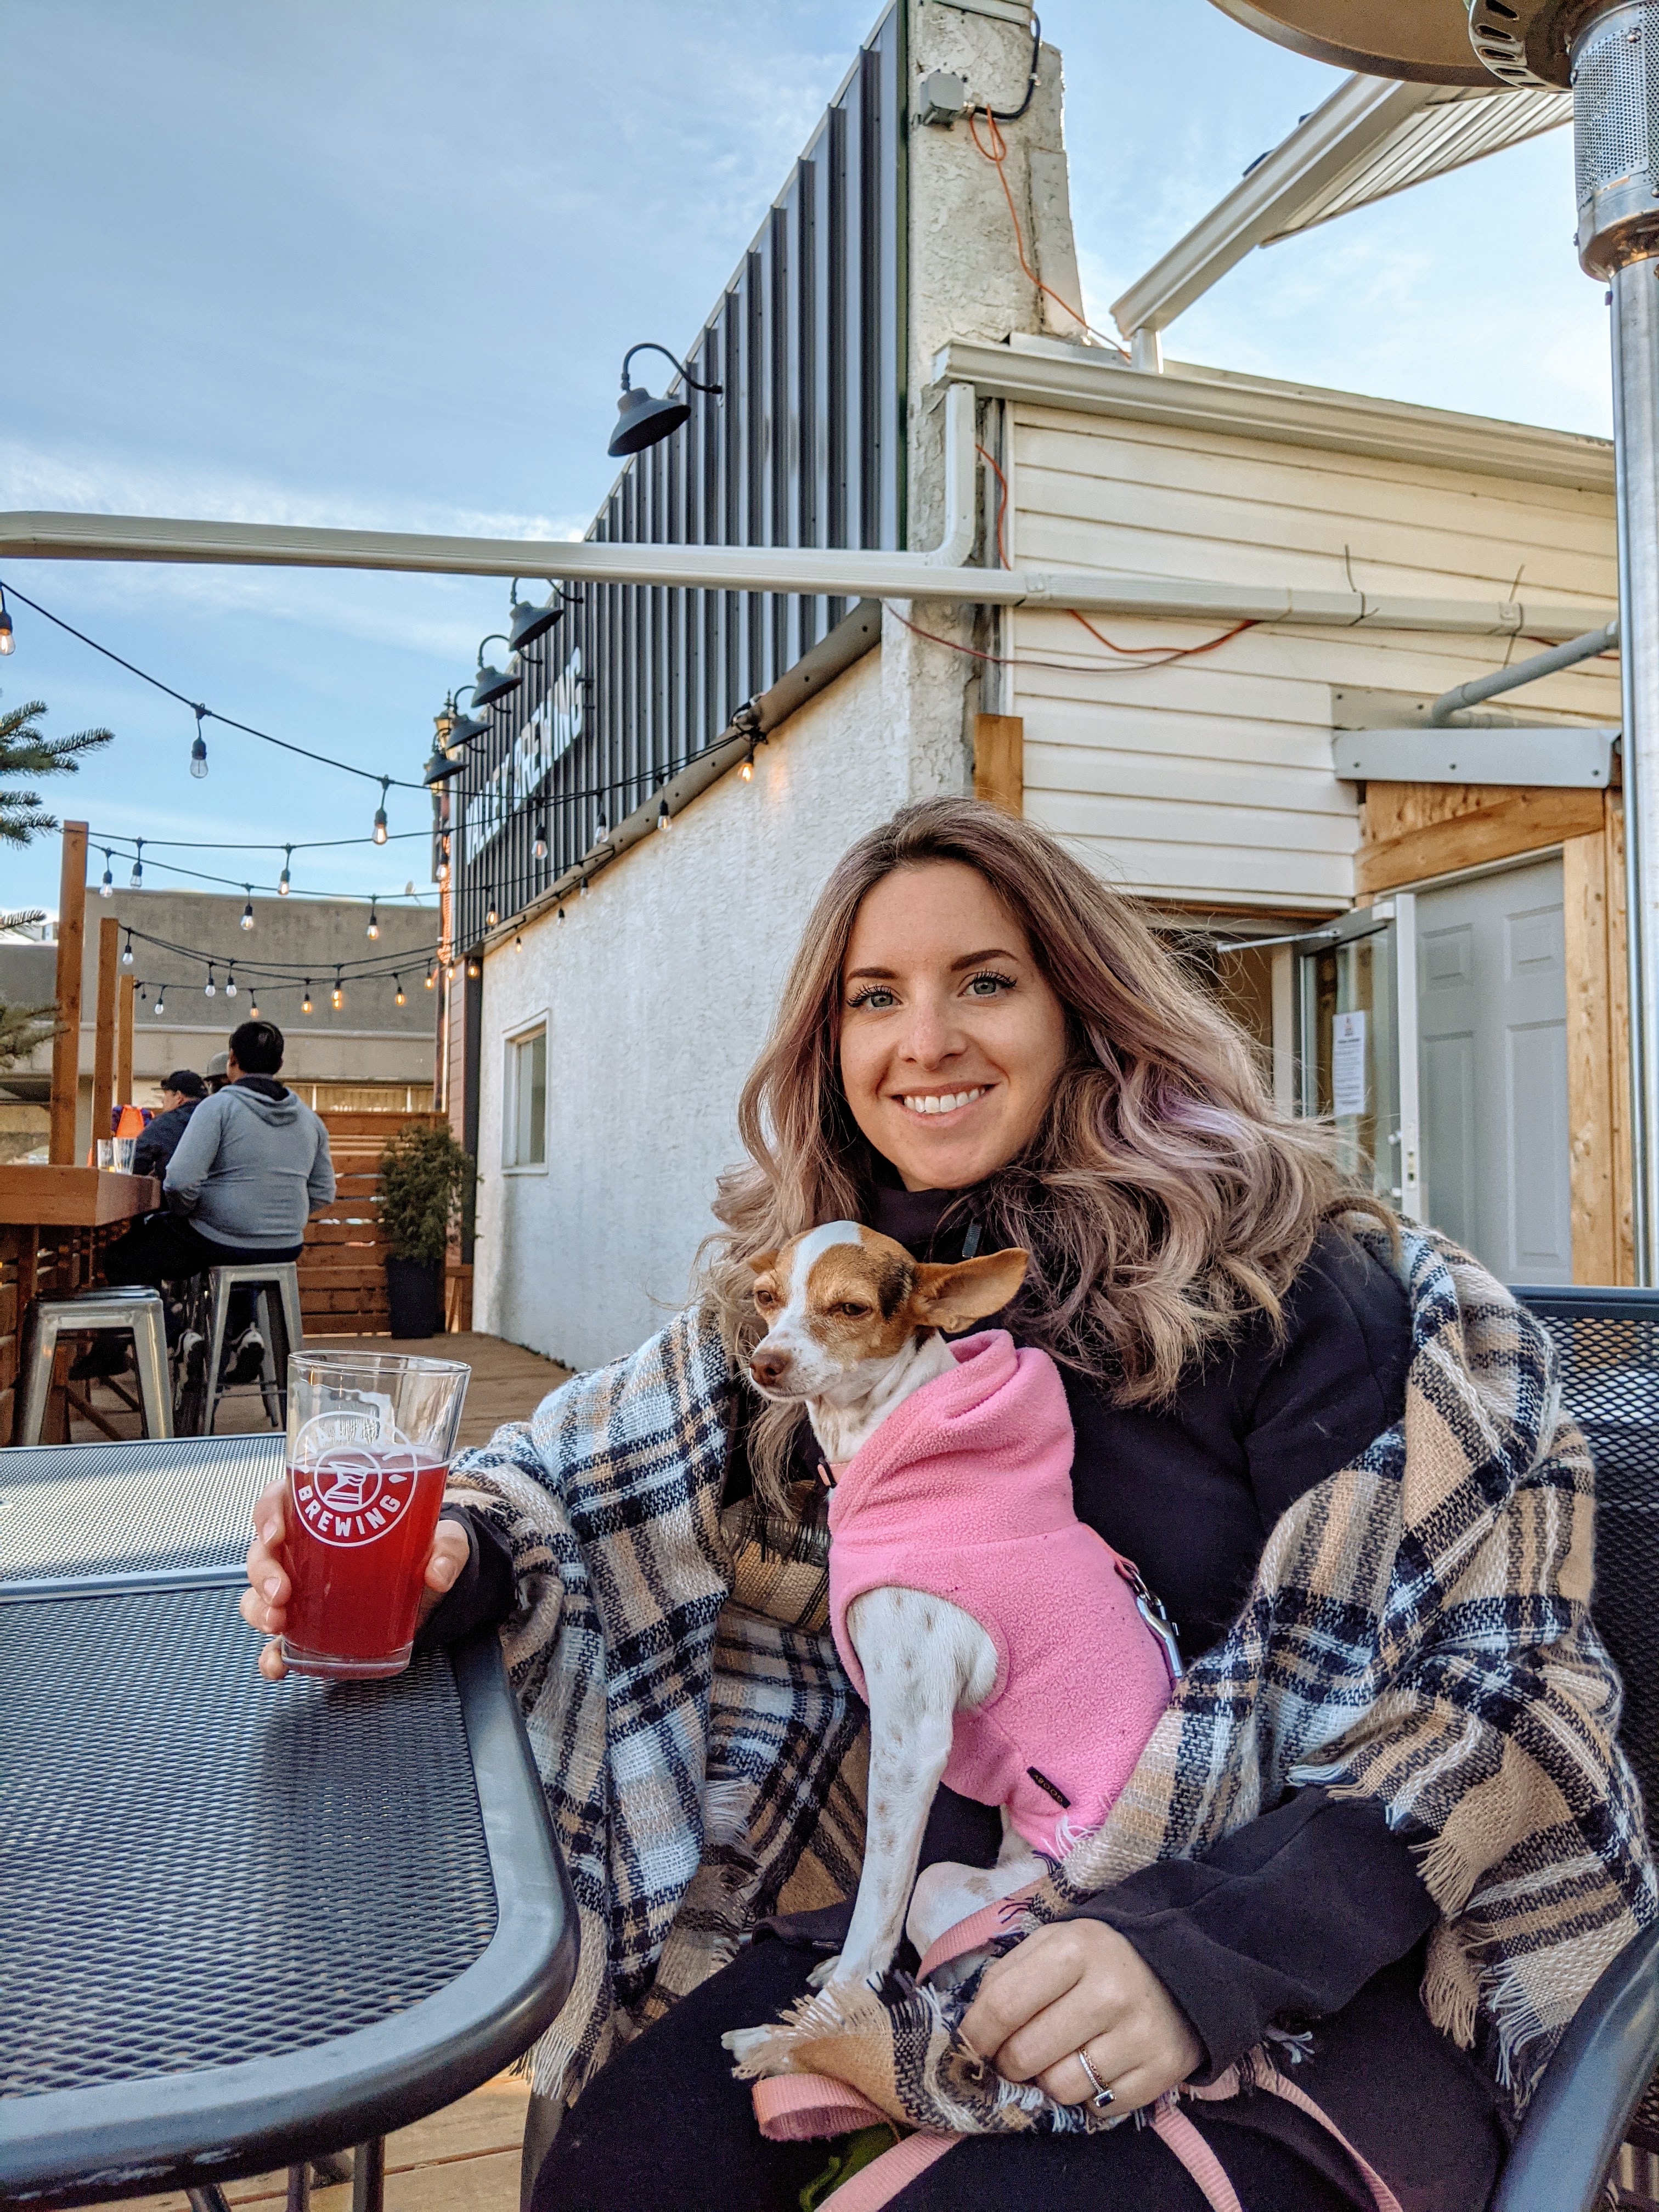 a girl and her small dog having a pint on an outdoor patio